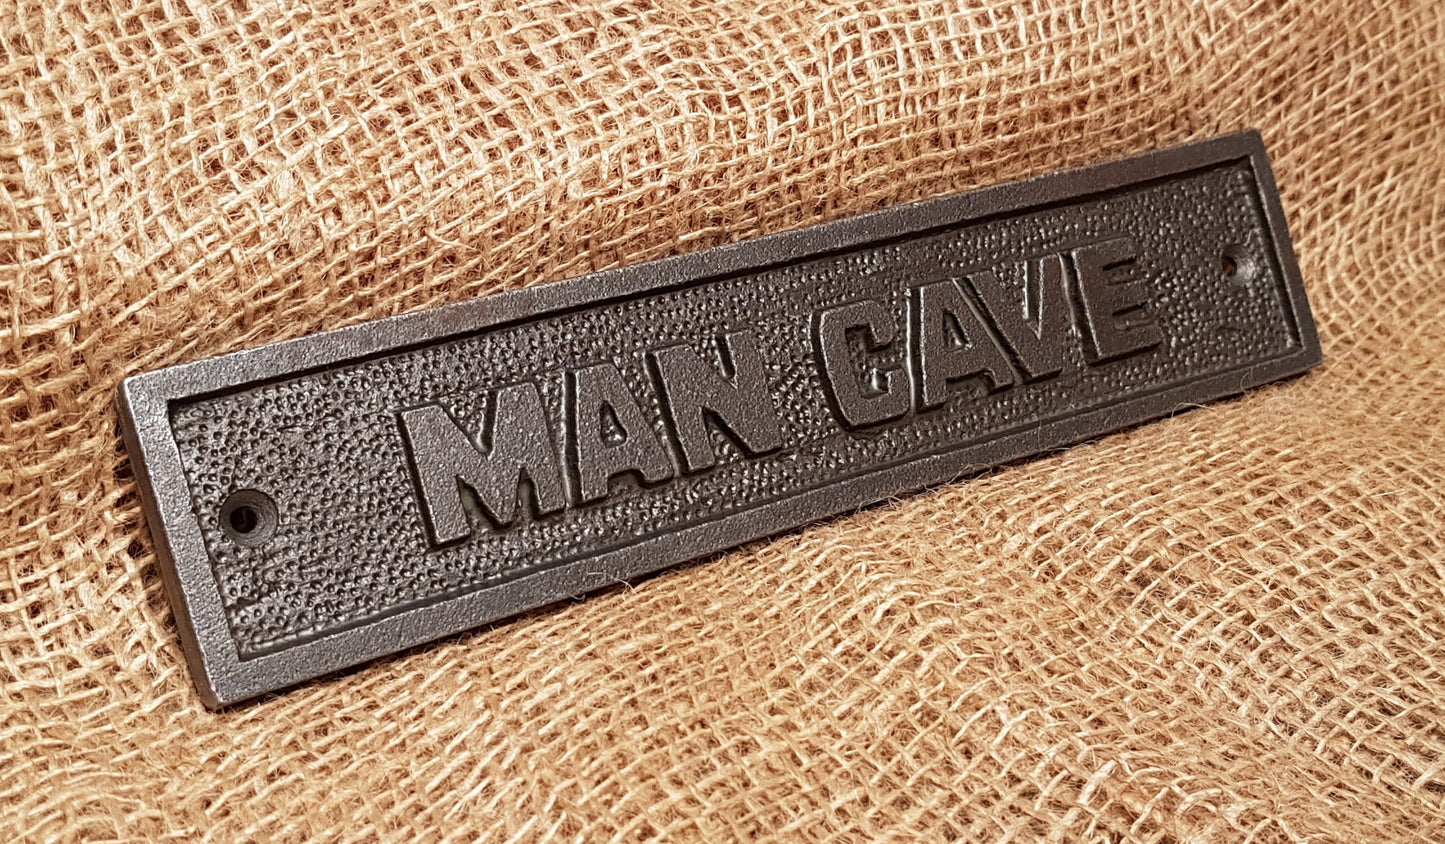 Man Cave - Spearhead Collection - Plaques and Signs - Gift Ideas, Home Decor, Man Cave Decor, Plaques and Signs, The Man Cave